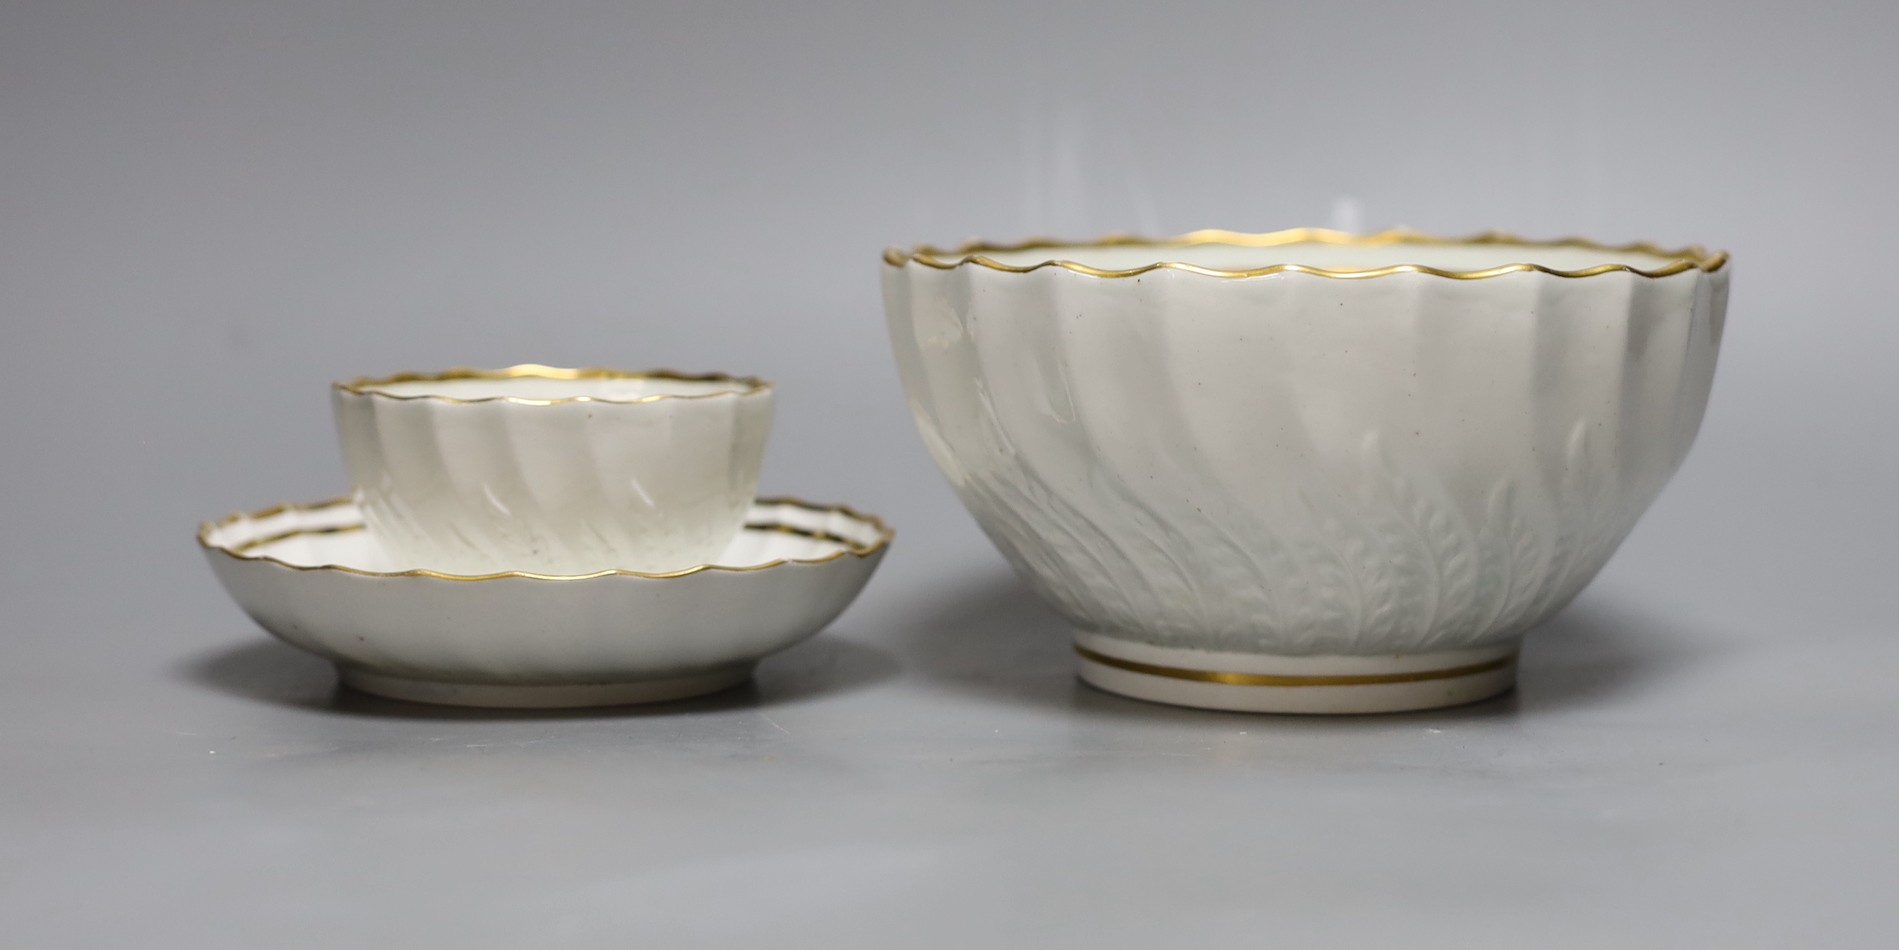 A Neale and Co rare teabowl and saucer and a matching bowl, each piece with acanthus leaf and spirally shanked moulding, the interiors with a gilt floret design, within gilt line borders, for a similar teabowl see Michae